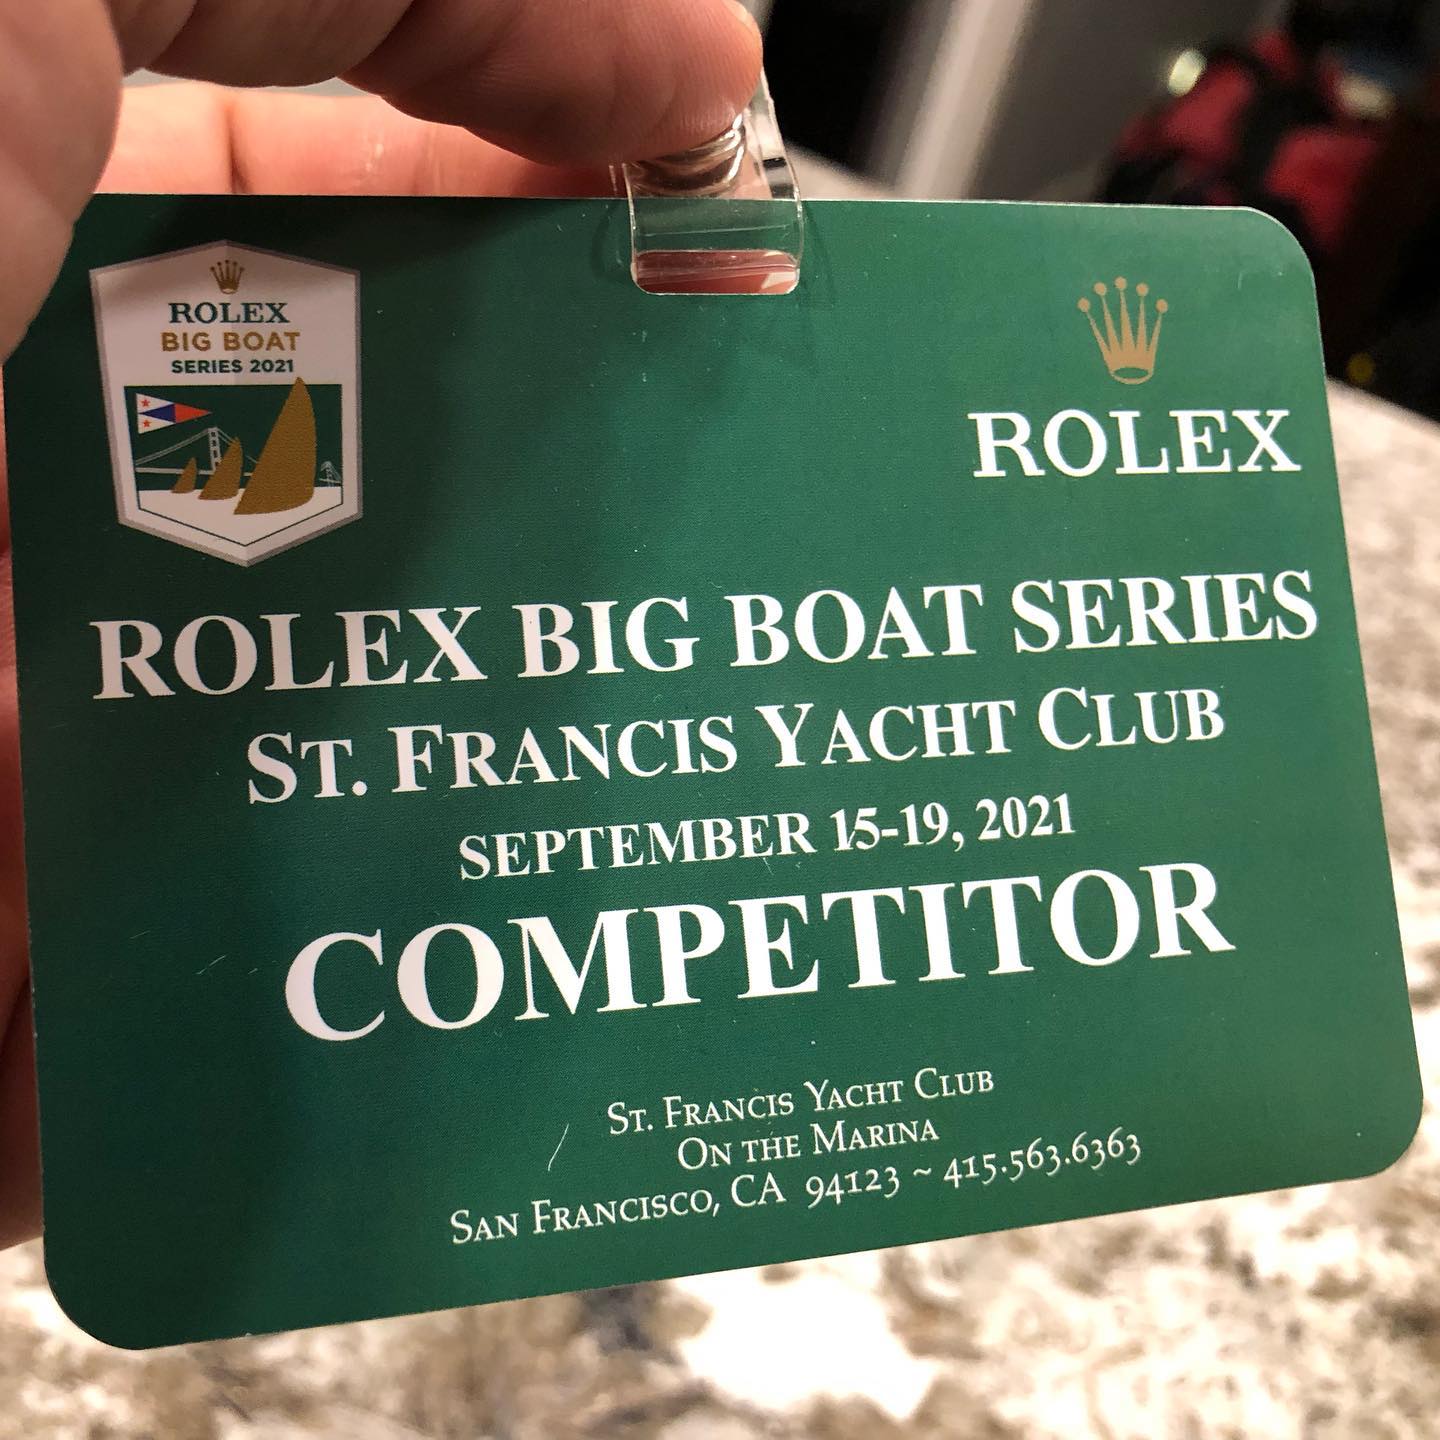 2021 Rolex Big Boat series day 2 on Starballs  retired some old gloves, found a cracked shackle. Thanks to Moni for the spare soft shackle :)